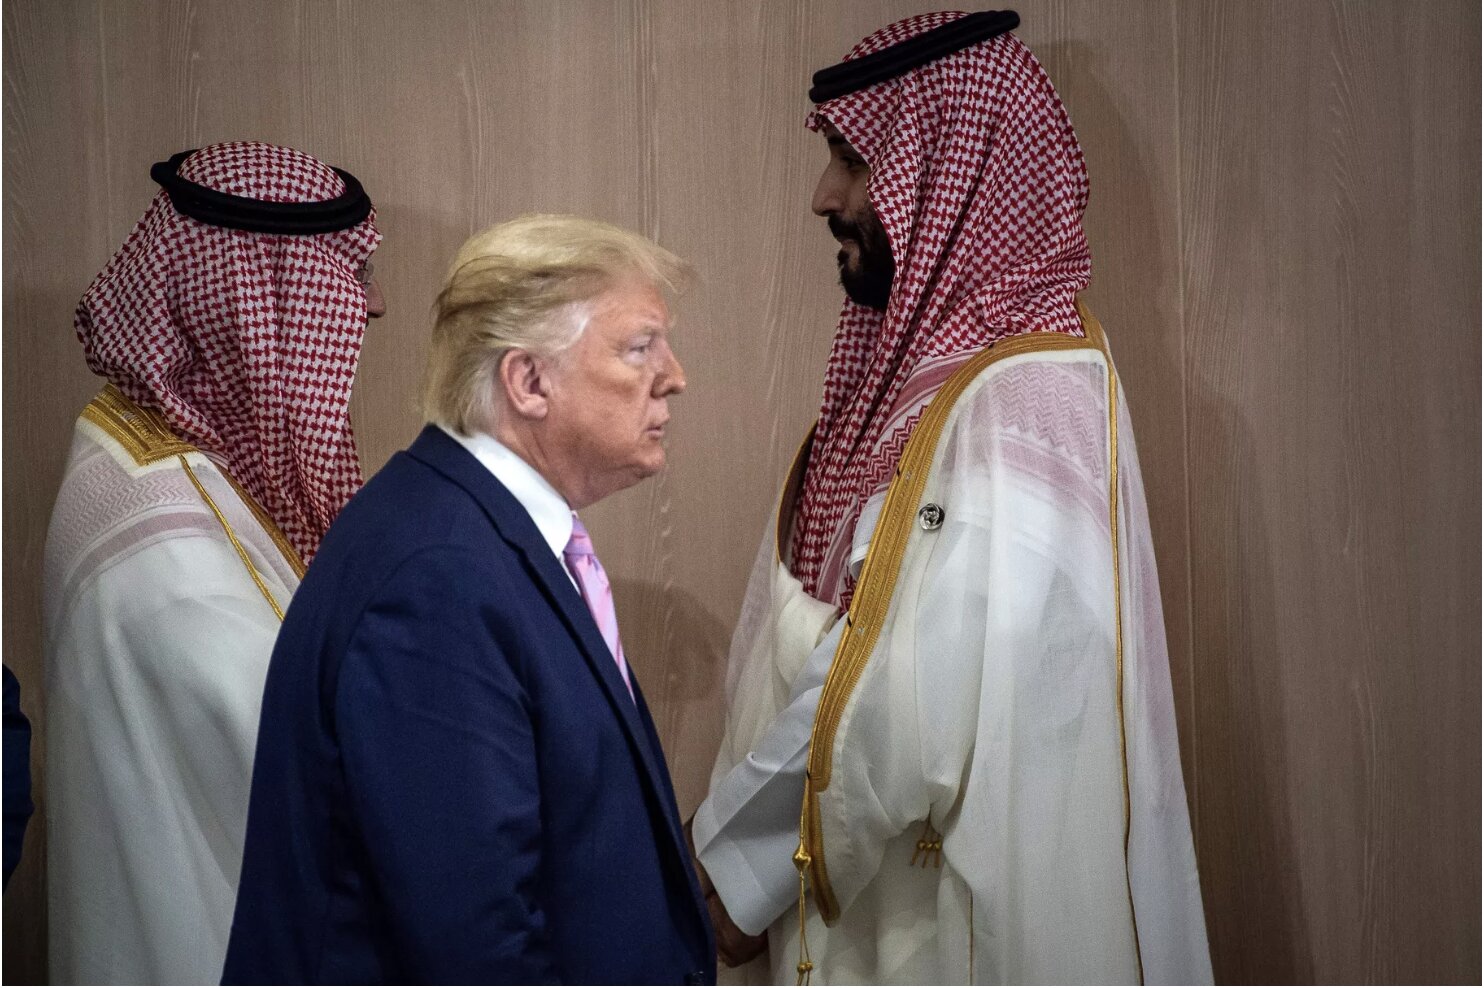 The US-Saudi alliance is deeply unpopular with the American people